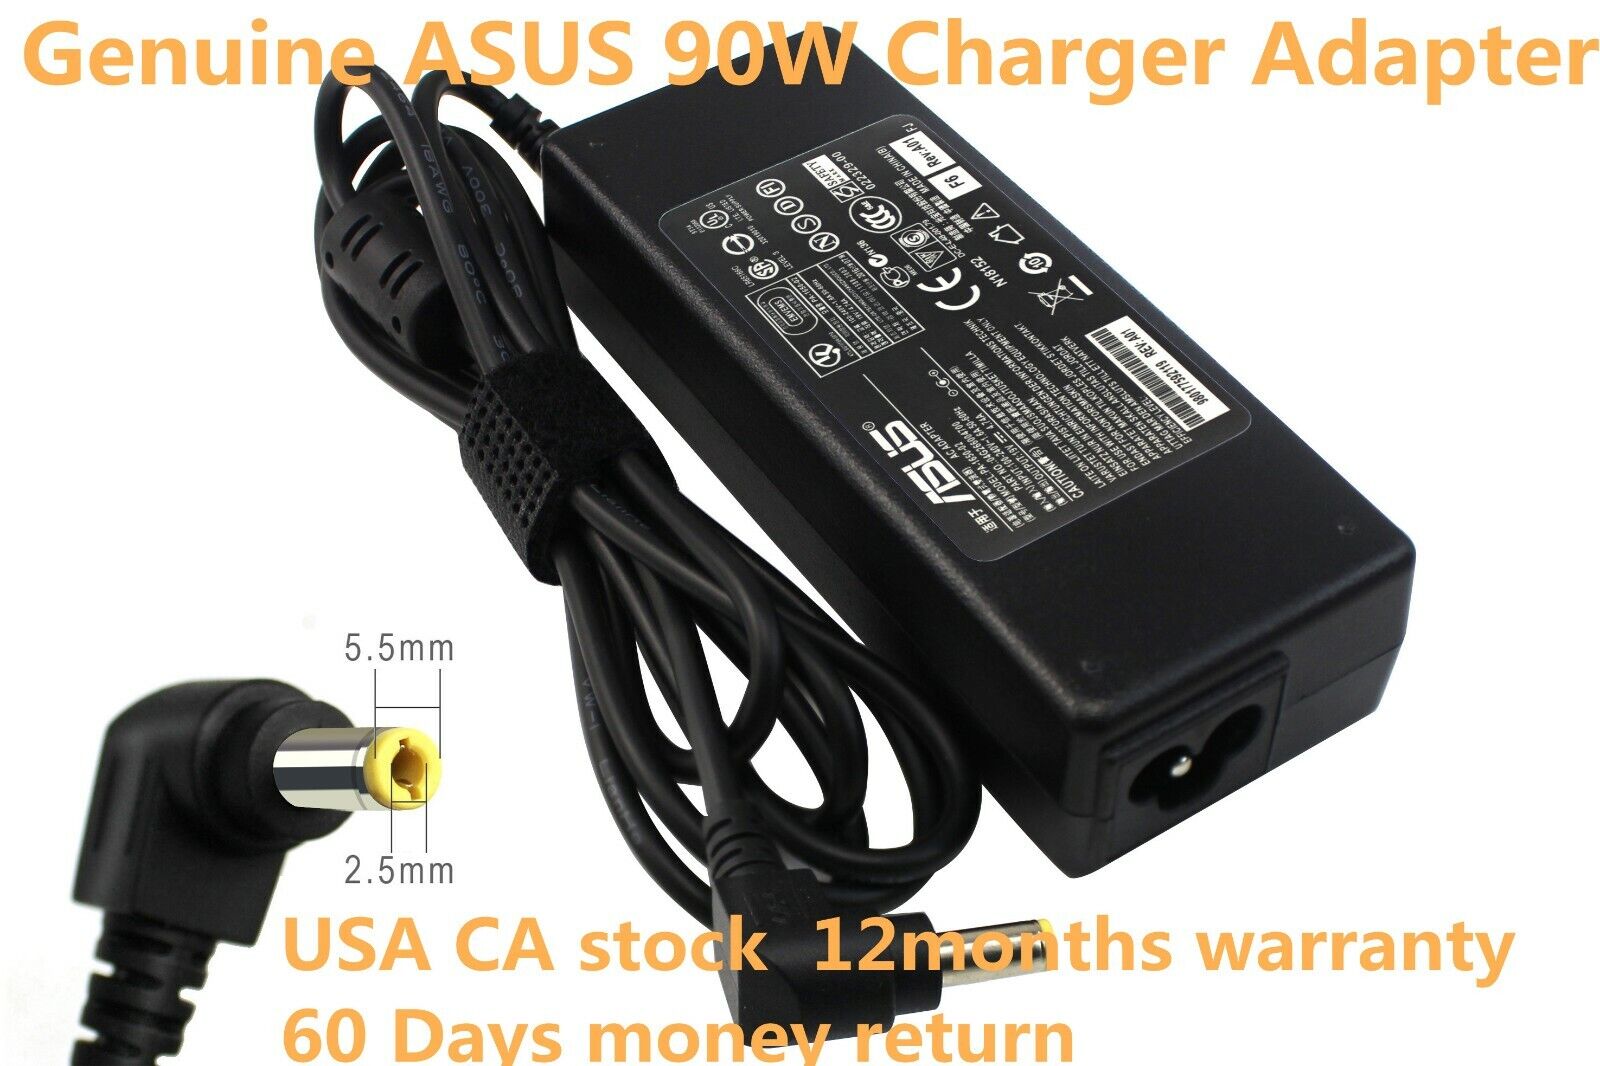 NEW Genuine ASUS 90W Charger AC Adapter A53 A53Z A53S A53T A55A U47A U57A A53SD